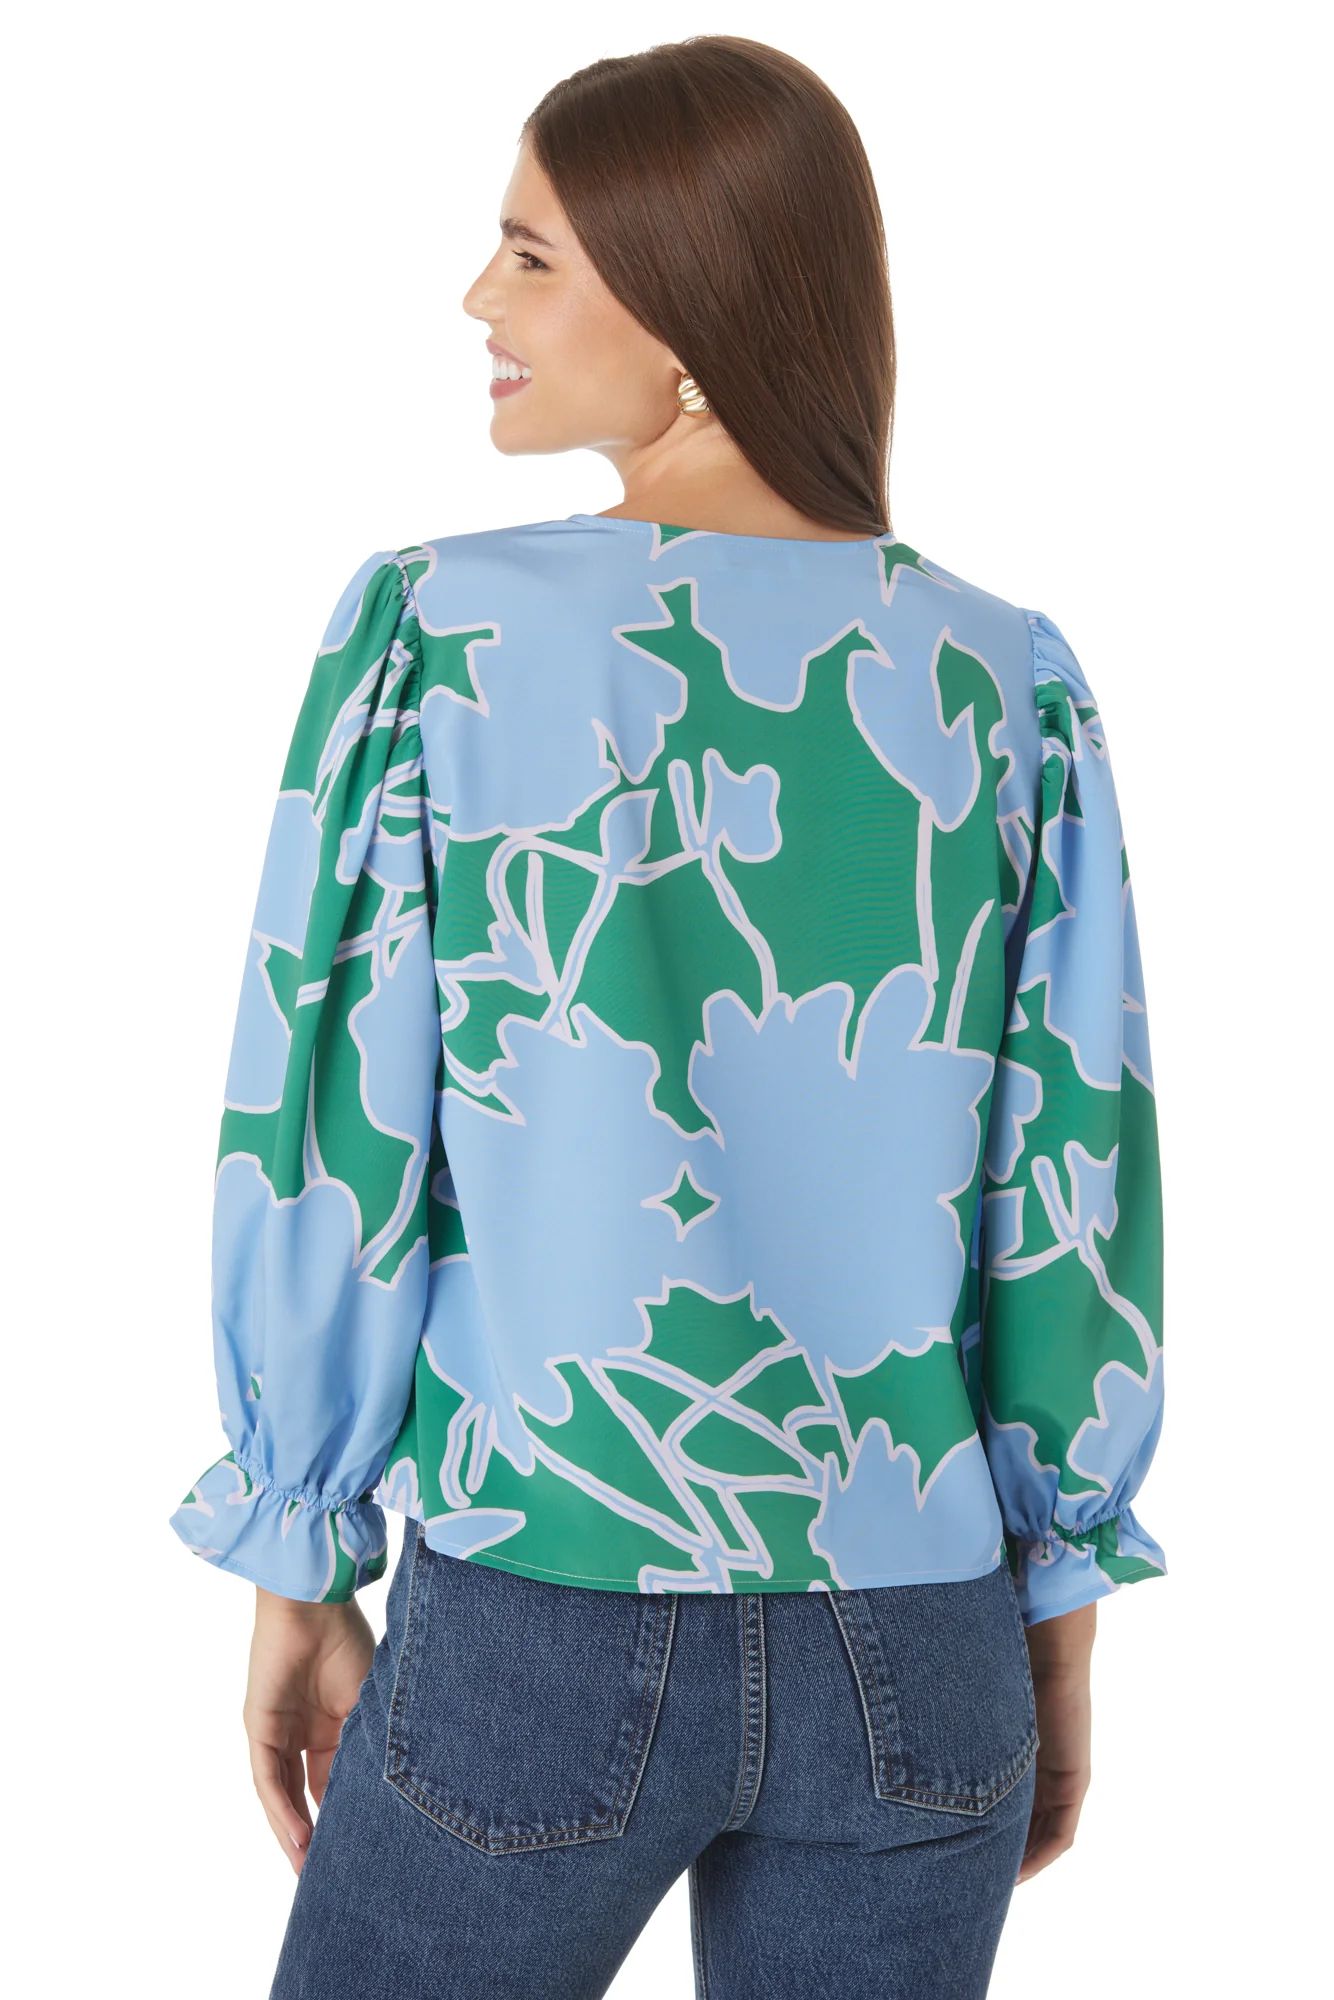 Jaimie Top in Floral Figure | CROSBY by Mollie Burch | CROSBY by Mollie Burch